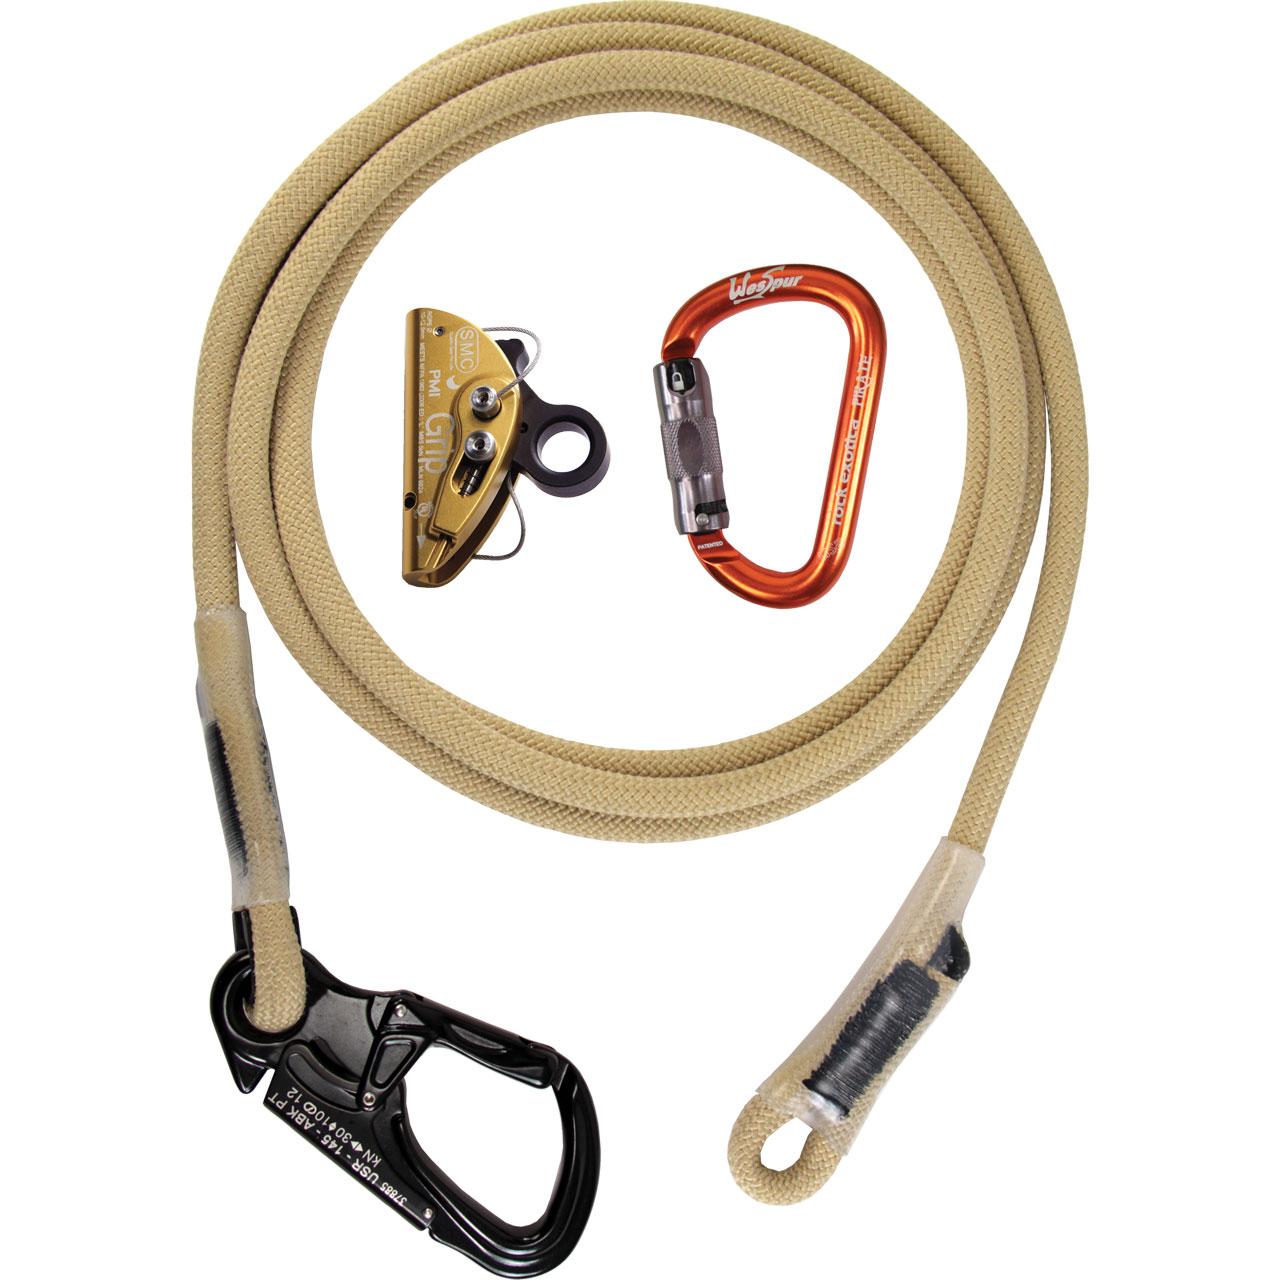 Rope Work-Positioning Lanyards for Tree Climbing